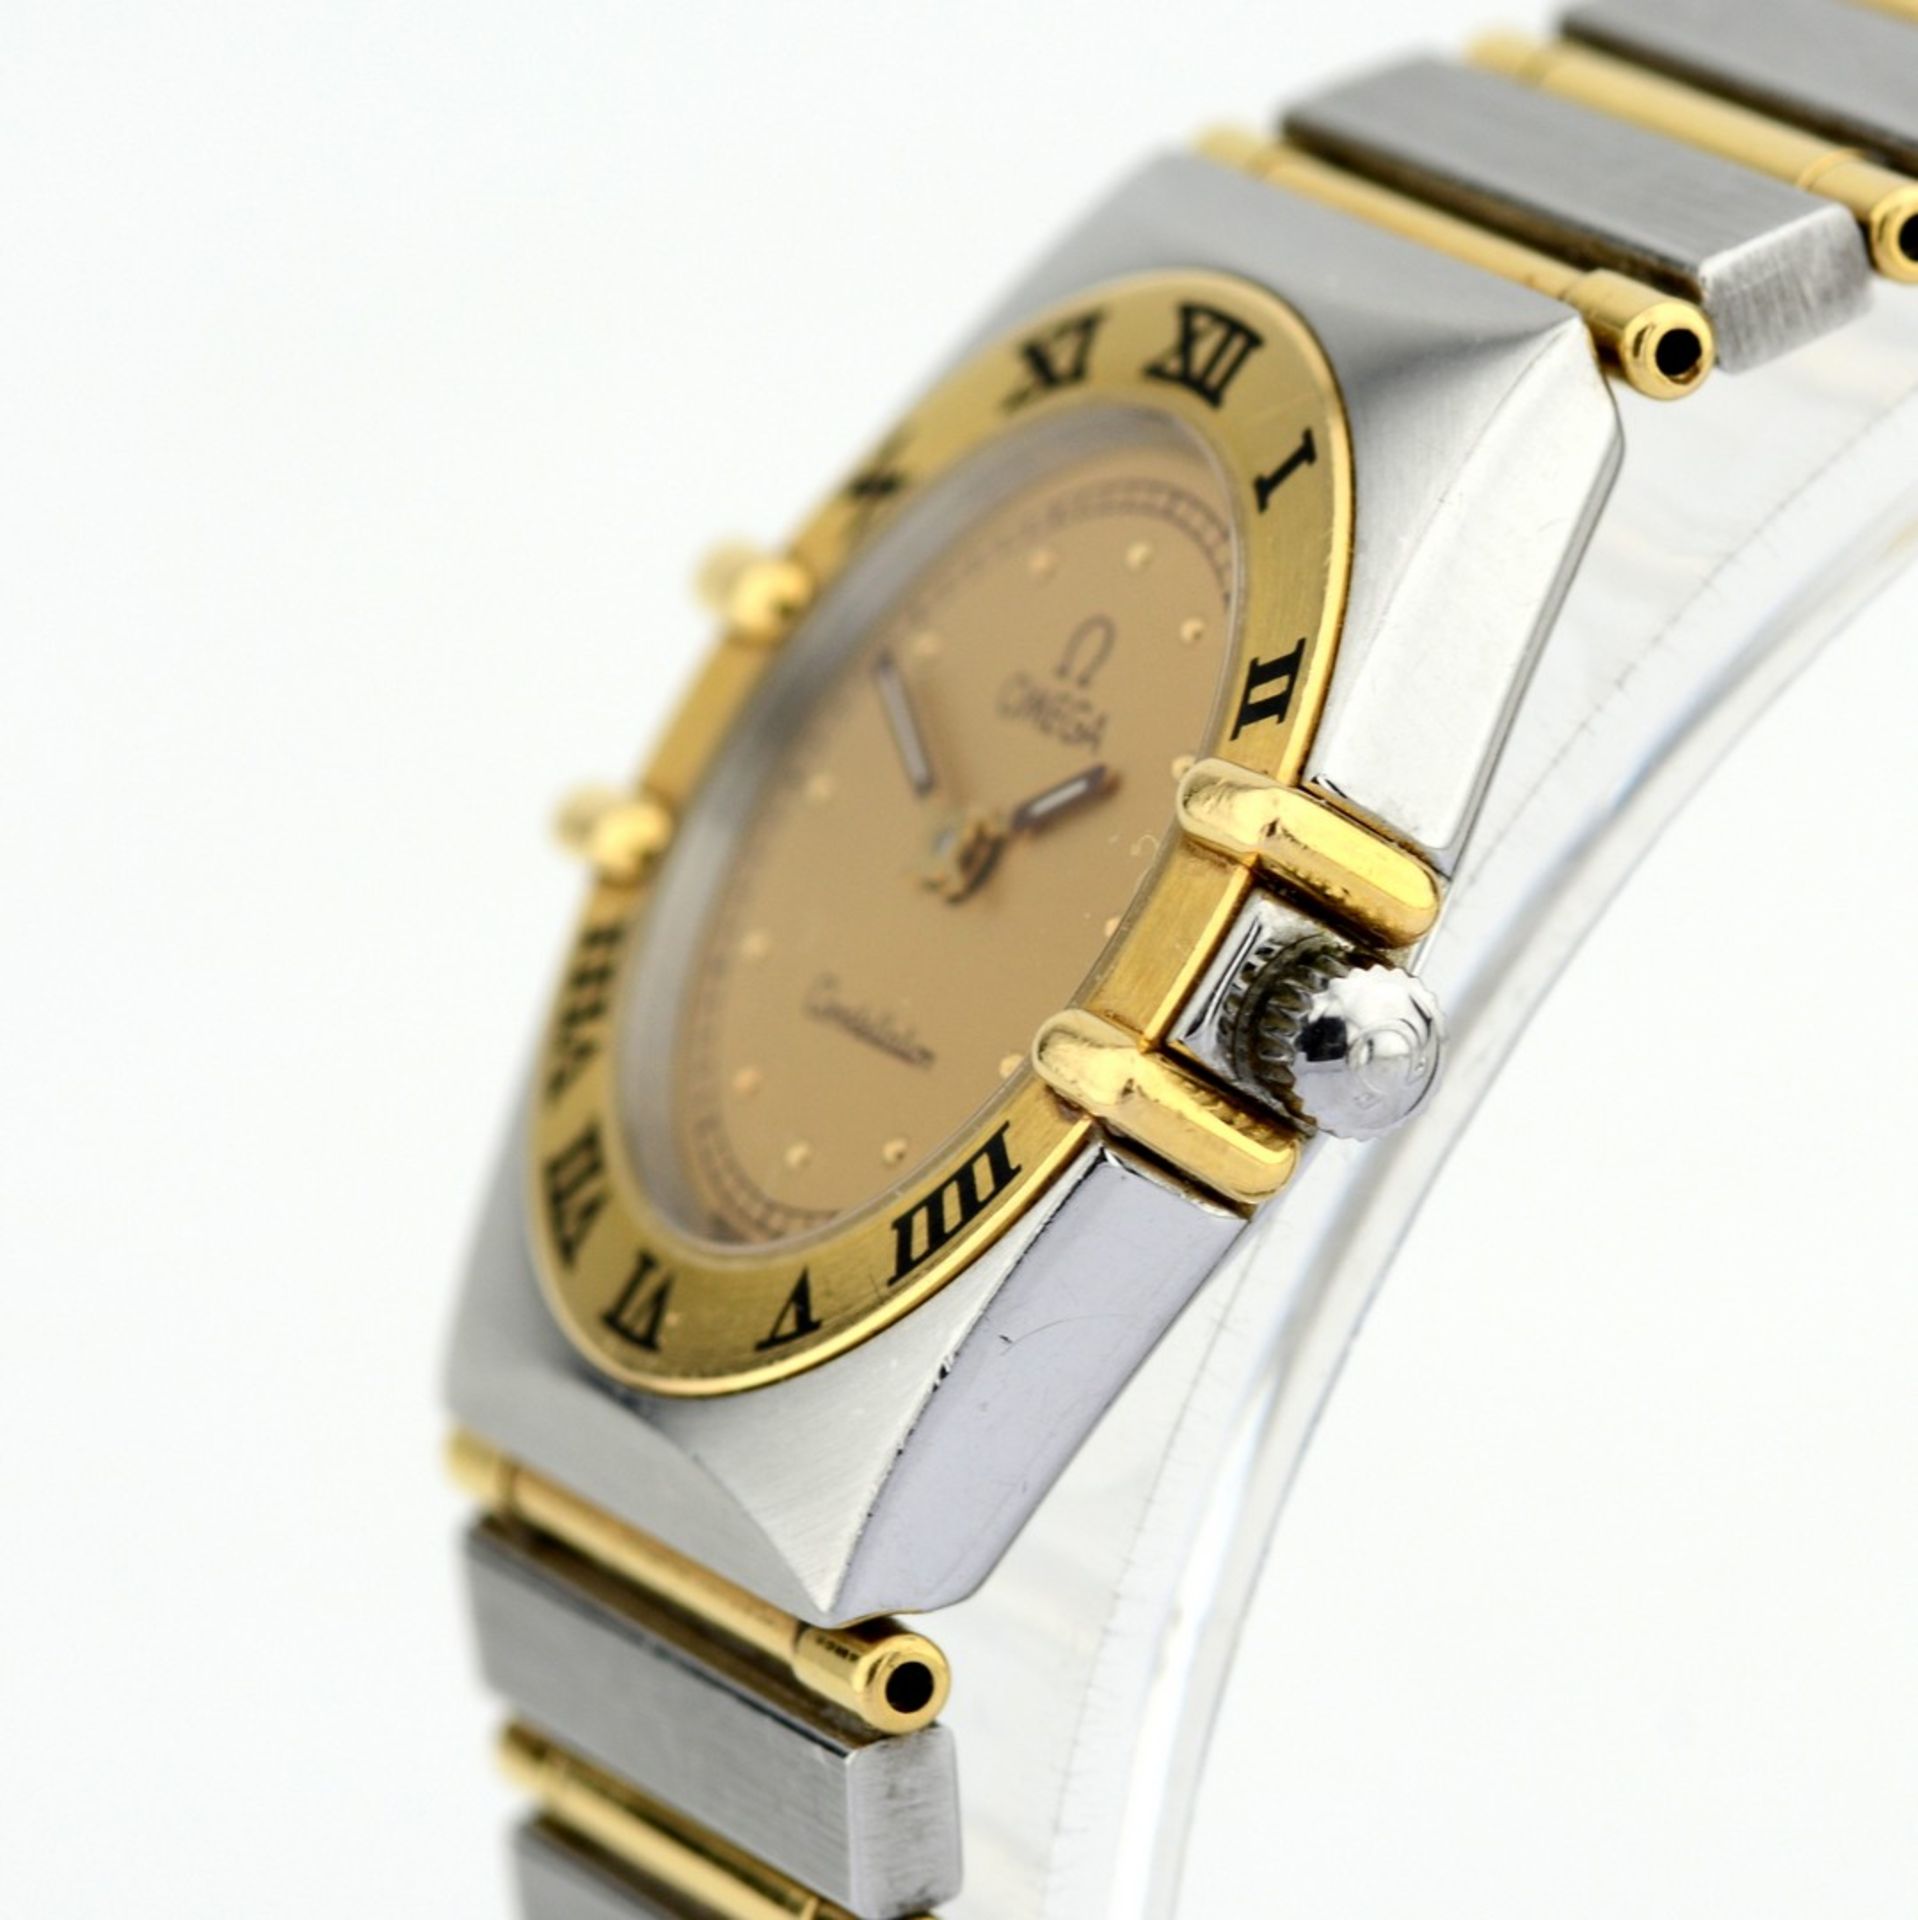 Omega / Constellation - Lady's Steel Wrist Watch - Image 4 of 7